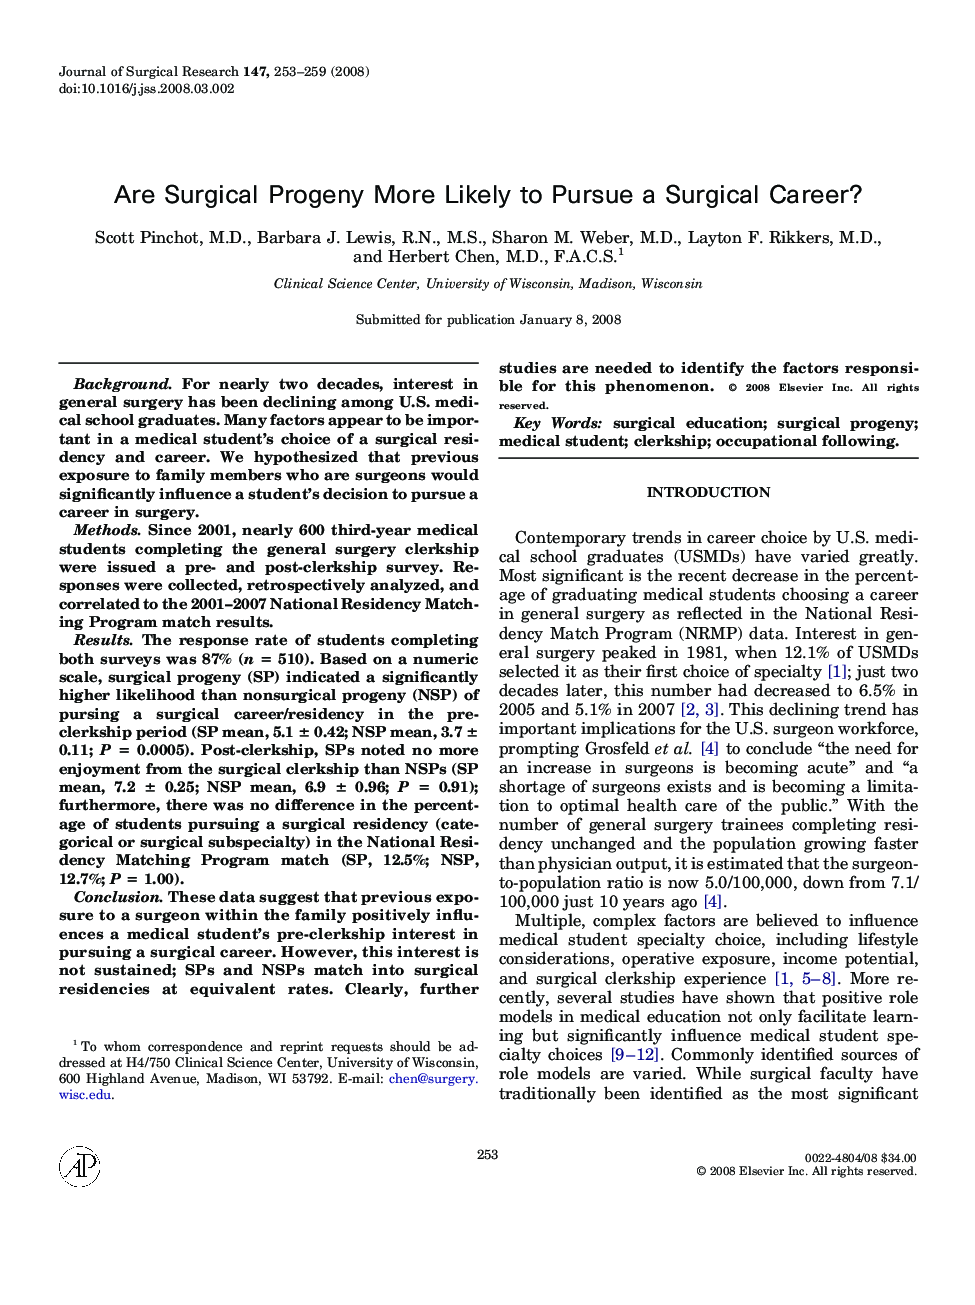 Are Surgical Progeny More Likely to Pursue a Surgical Career?